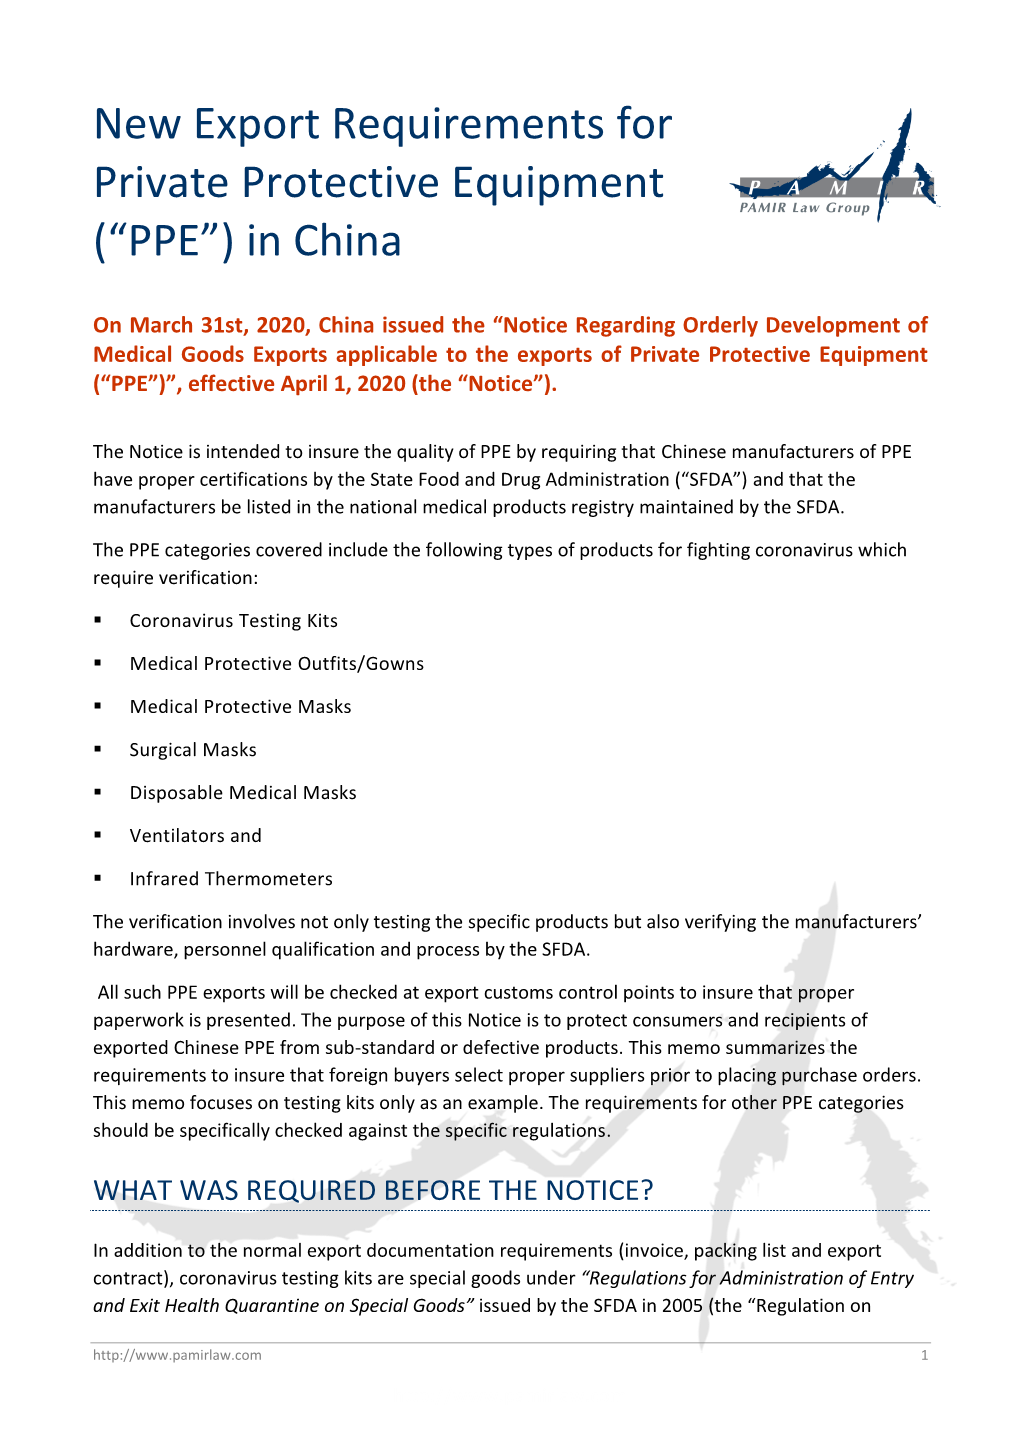 New Export Requirements for Private Protective Equipment (“PPE”) in China